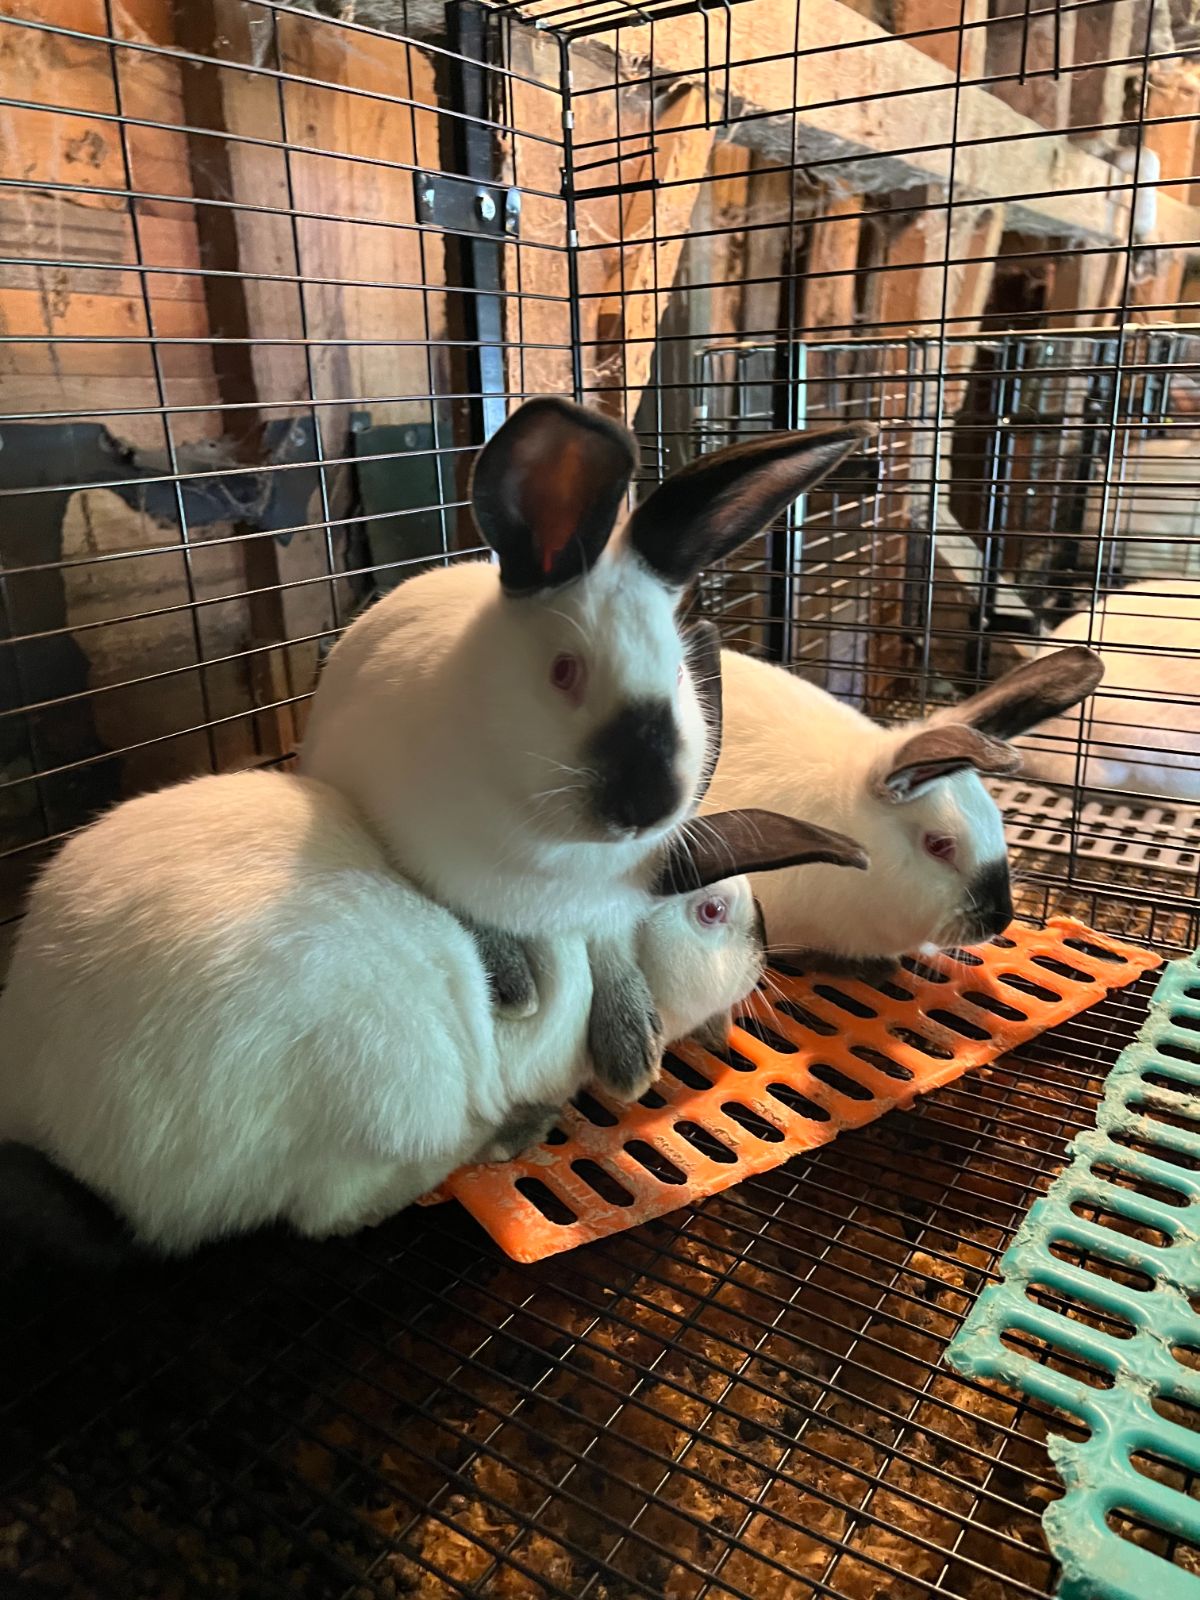 Three young Californians meat rabbits in a cage (demonstration only, not how breeders should be caged)